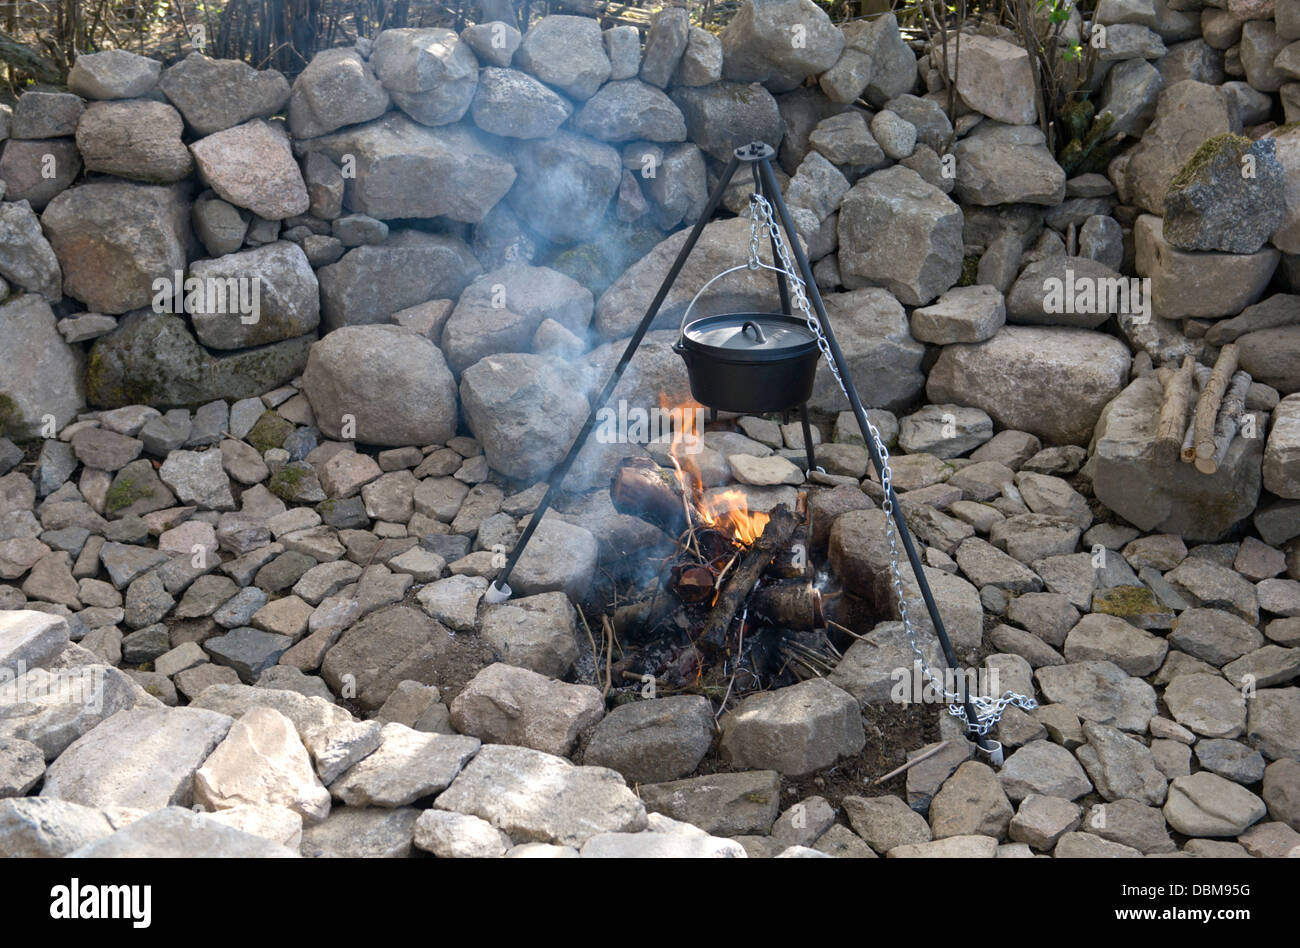 https://c8.alamy.com/comp/DBM95G/outdoor-firepit-with-tripod-and-dutch-oven-cooking-pot-DBM95G.jpg